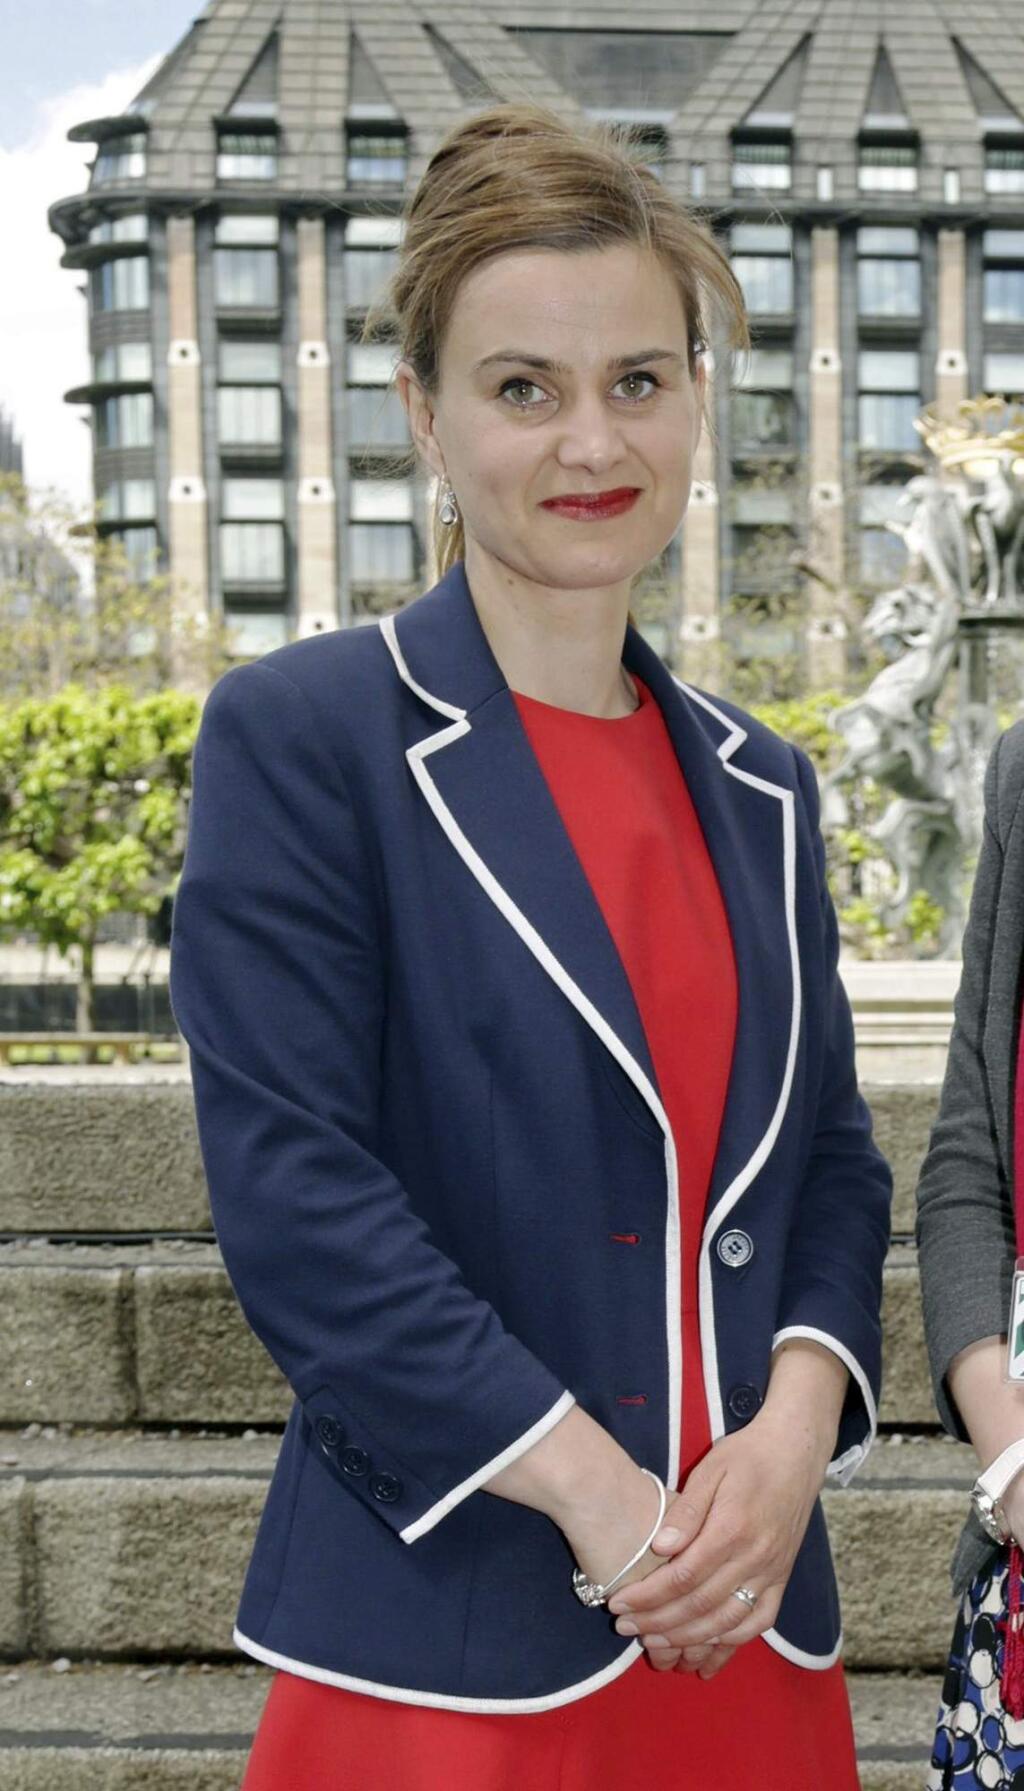 FILE - In this May 12, 2015 file photo, Labour Member of Parliament Jo Cox poses for a photograph. British lawmaker Cox was shot and killed near Leeds, in West Yorkshire, England, it has been reported, Thursday, June 16, 2016. (Yui Mok/PA via AP, File)